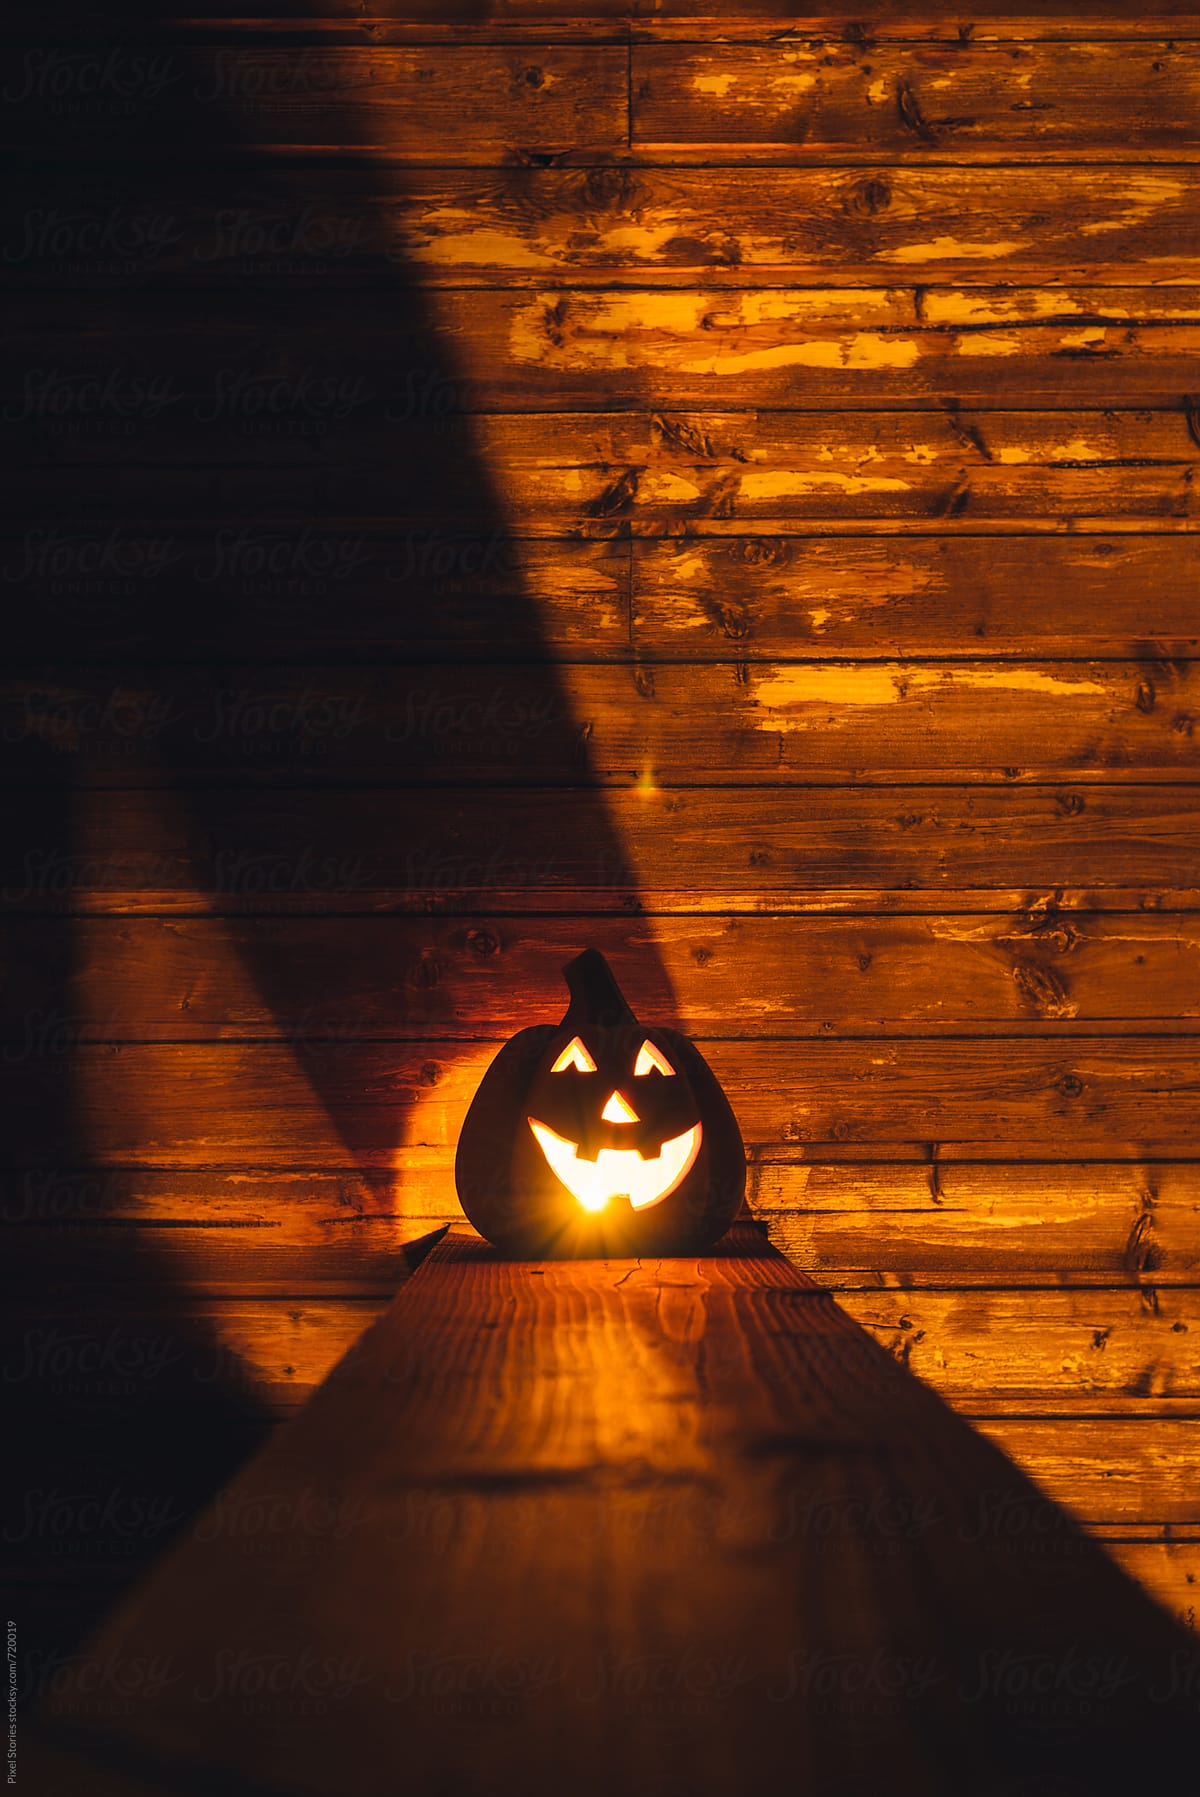 Ceramic pumpkin with lit candle on porch